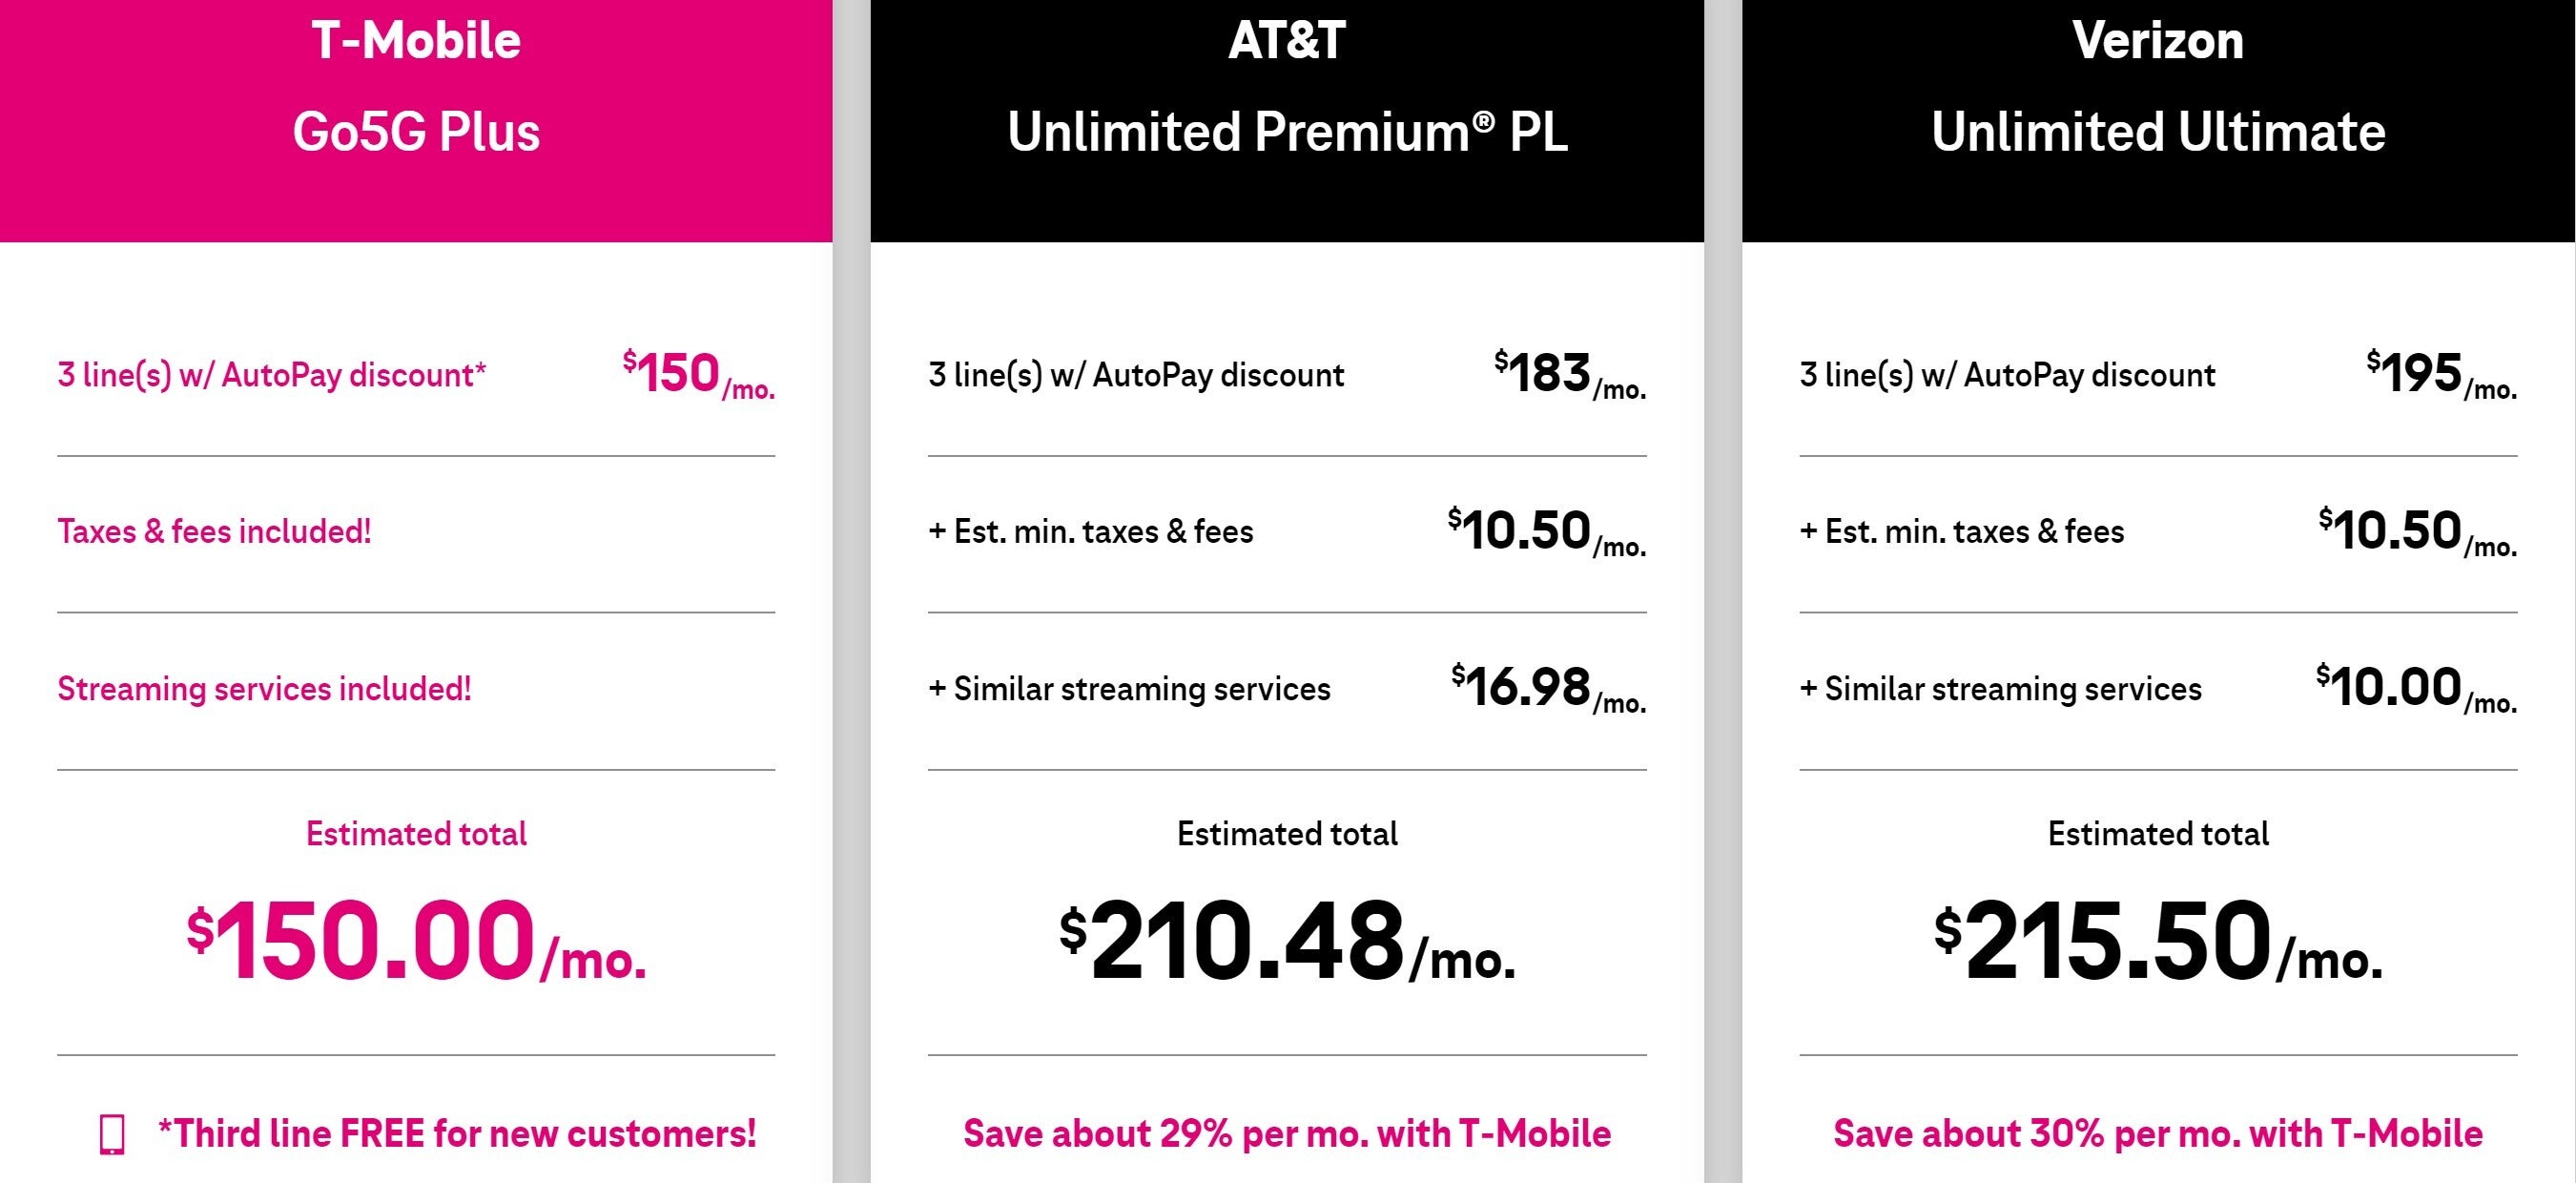 T-Mobile vs AT&amp;T vs Verizon plan prices - Is T-Mobile still the underdog after the plan price increases?